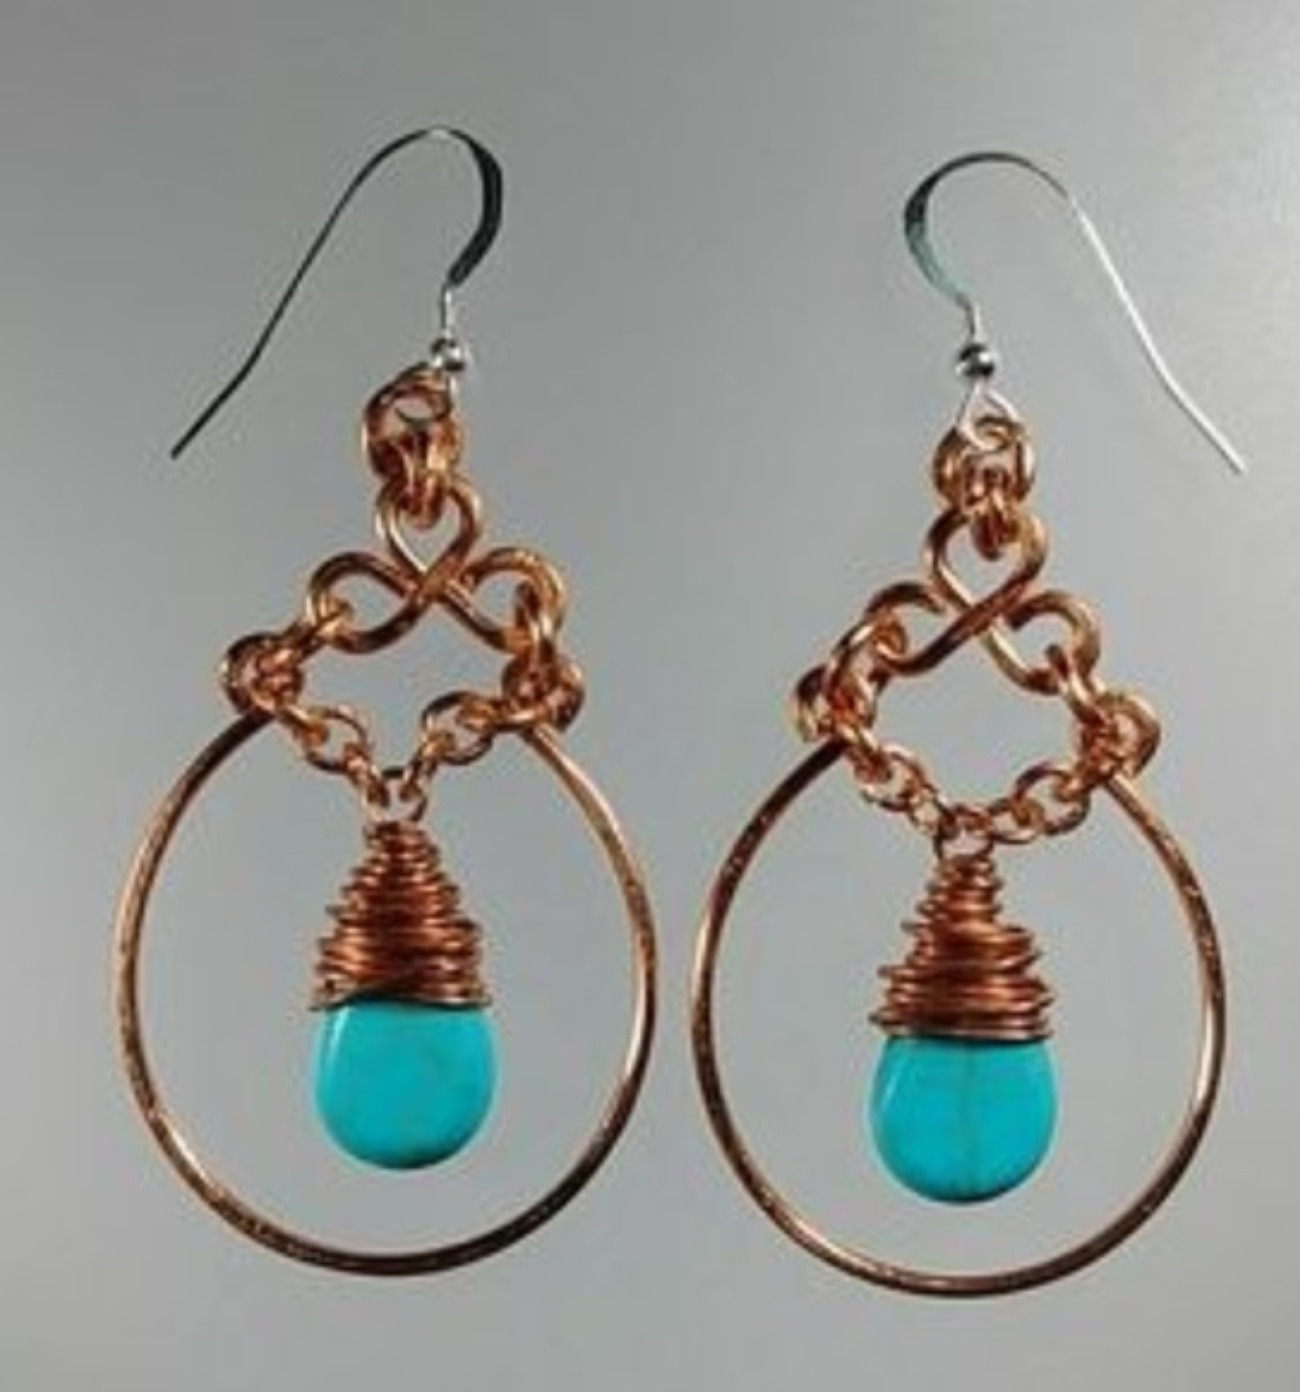 617 - EAR - Description:  Earrings: Copper Wire, Turquoise Howlite Gemstone (Sterling Silver Earwire)  Dimension: 2 1/2 ' L (Inches